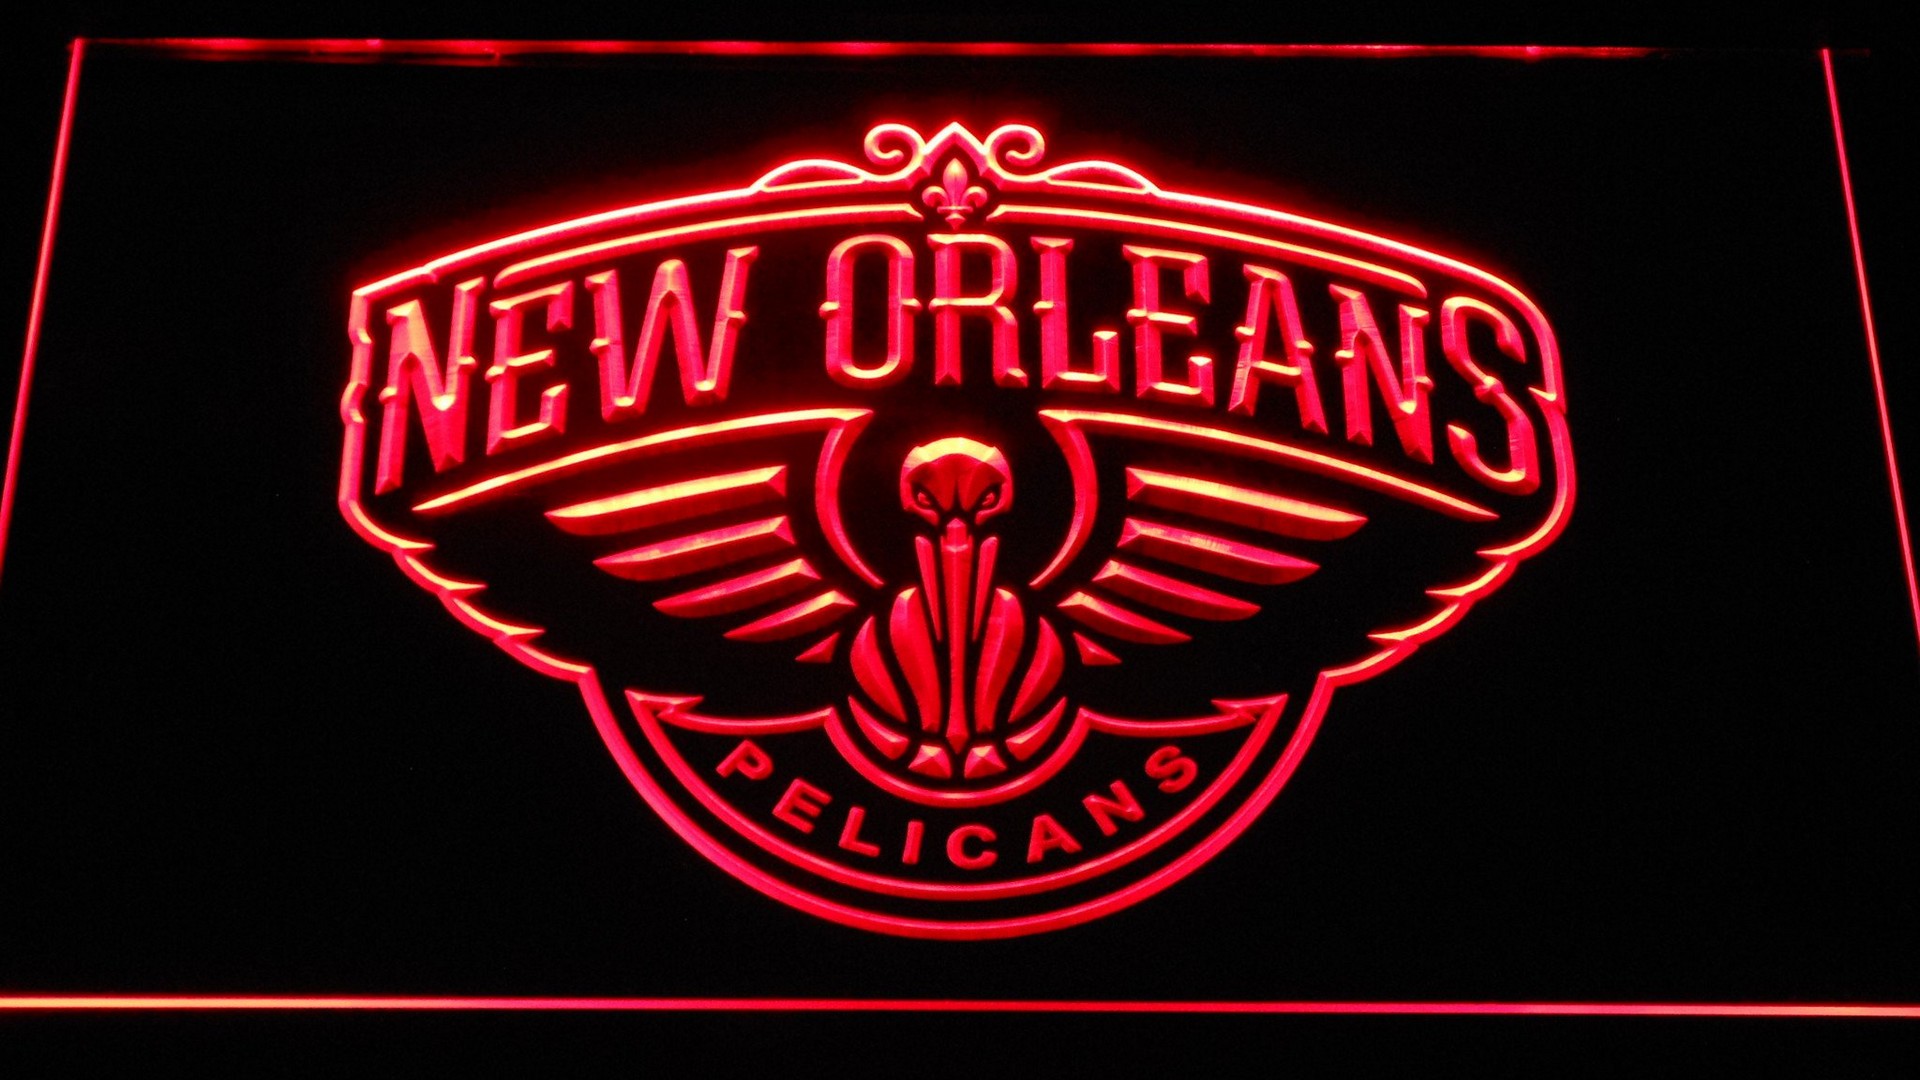 Wallpapers HD New Orleans Pelicans with high-resolution 1920x1080 pixel. You can use this wallpaper for your Desktop Computer Backgrounds, Windows or Mac Screensavers, iPhone Lock screen, Tablet or Android and another Mobile Phone device